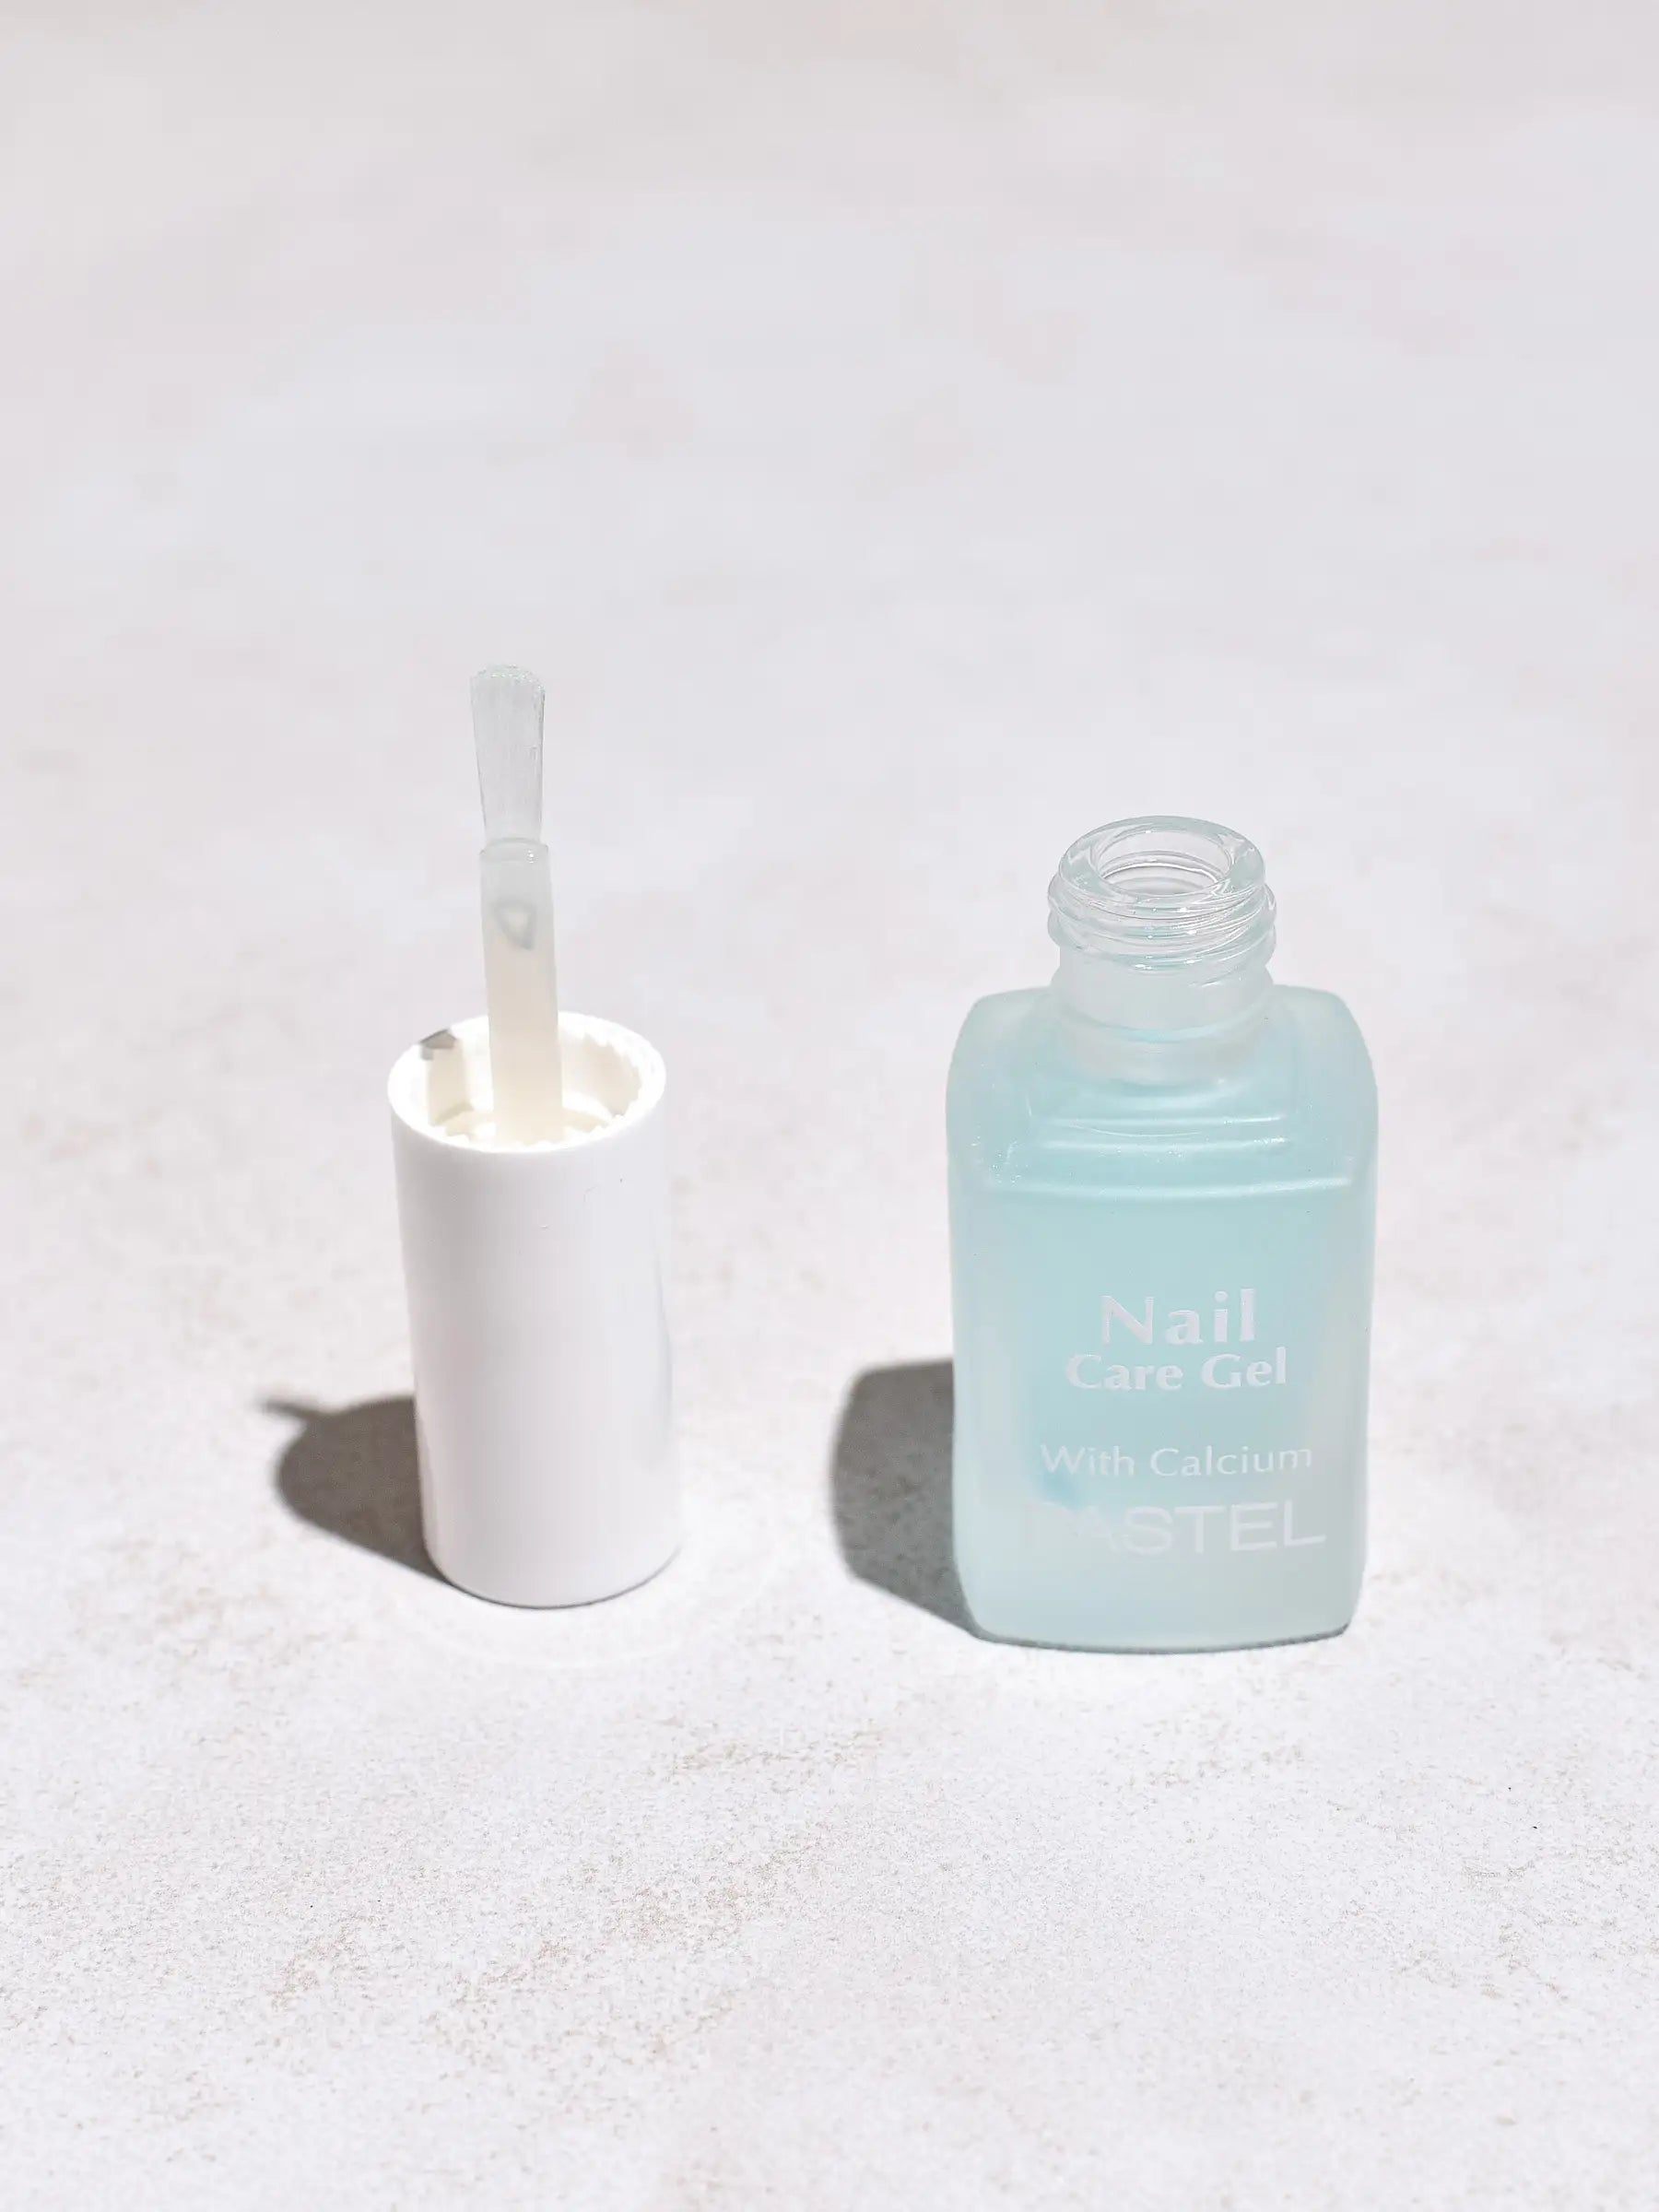 NAIL CARE GEL WITH CALCIUM